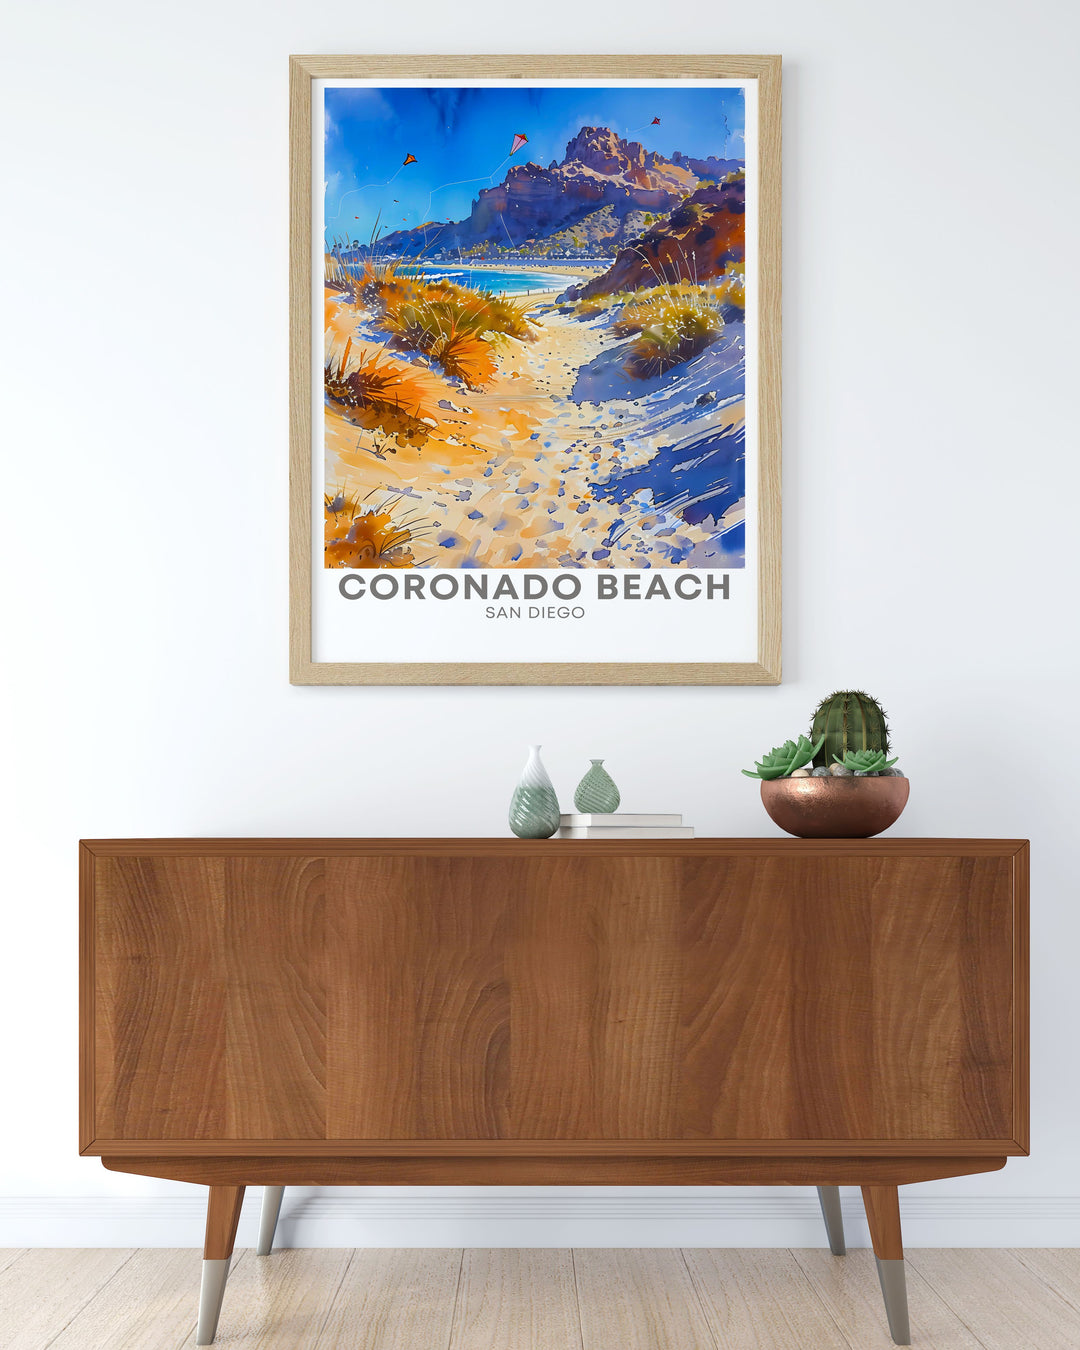 Enhance your home with our Coronado Prints featuring the iconic Vail Ski slopes and the mesmerizing Sand Dunes. These prints are crafted to bring a touch of Coronados natural wonder into your living space with stunning clarity and color.